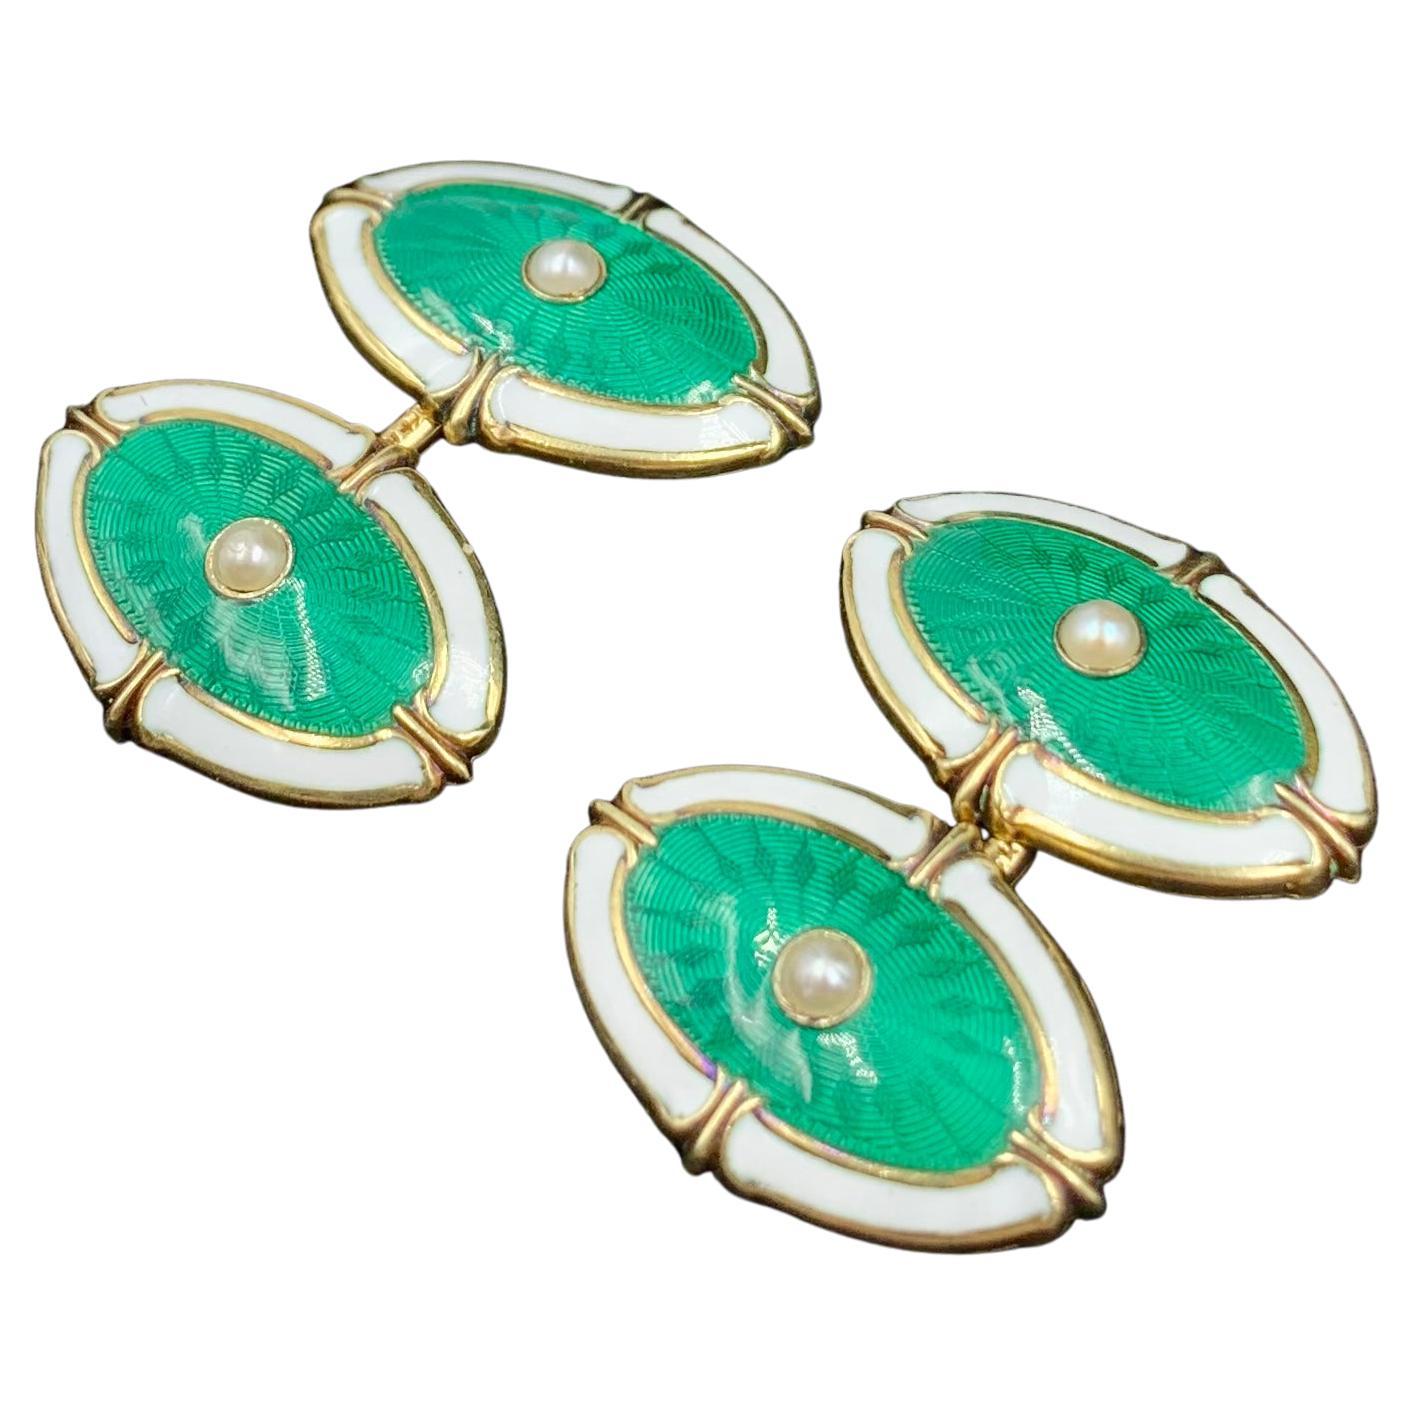 Eye of Protection jewels have been a classic amulet for centuries, designed to attract positive energy.
This pair of green guilloche enamel cufflinks dates from the Edwardian Period, early twentieth century. Lovely details such as the guilloche